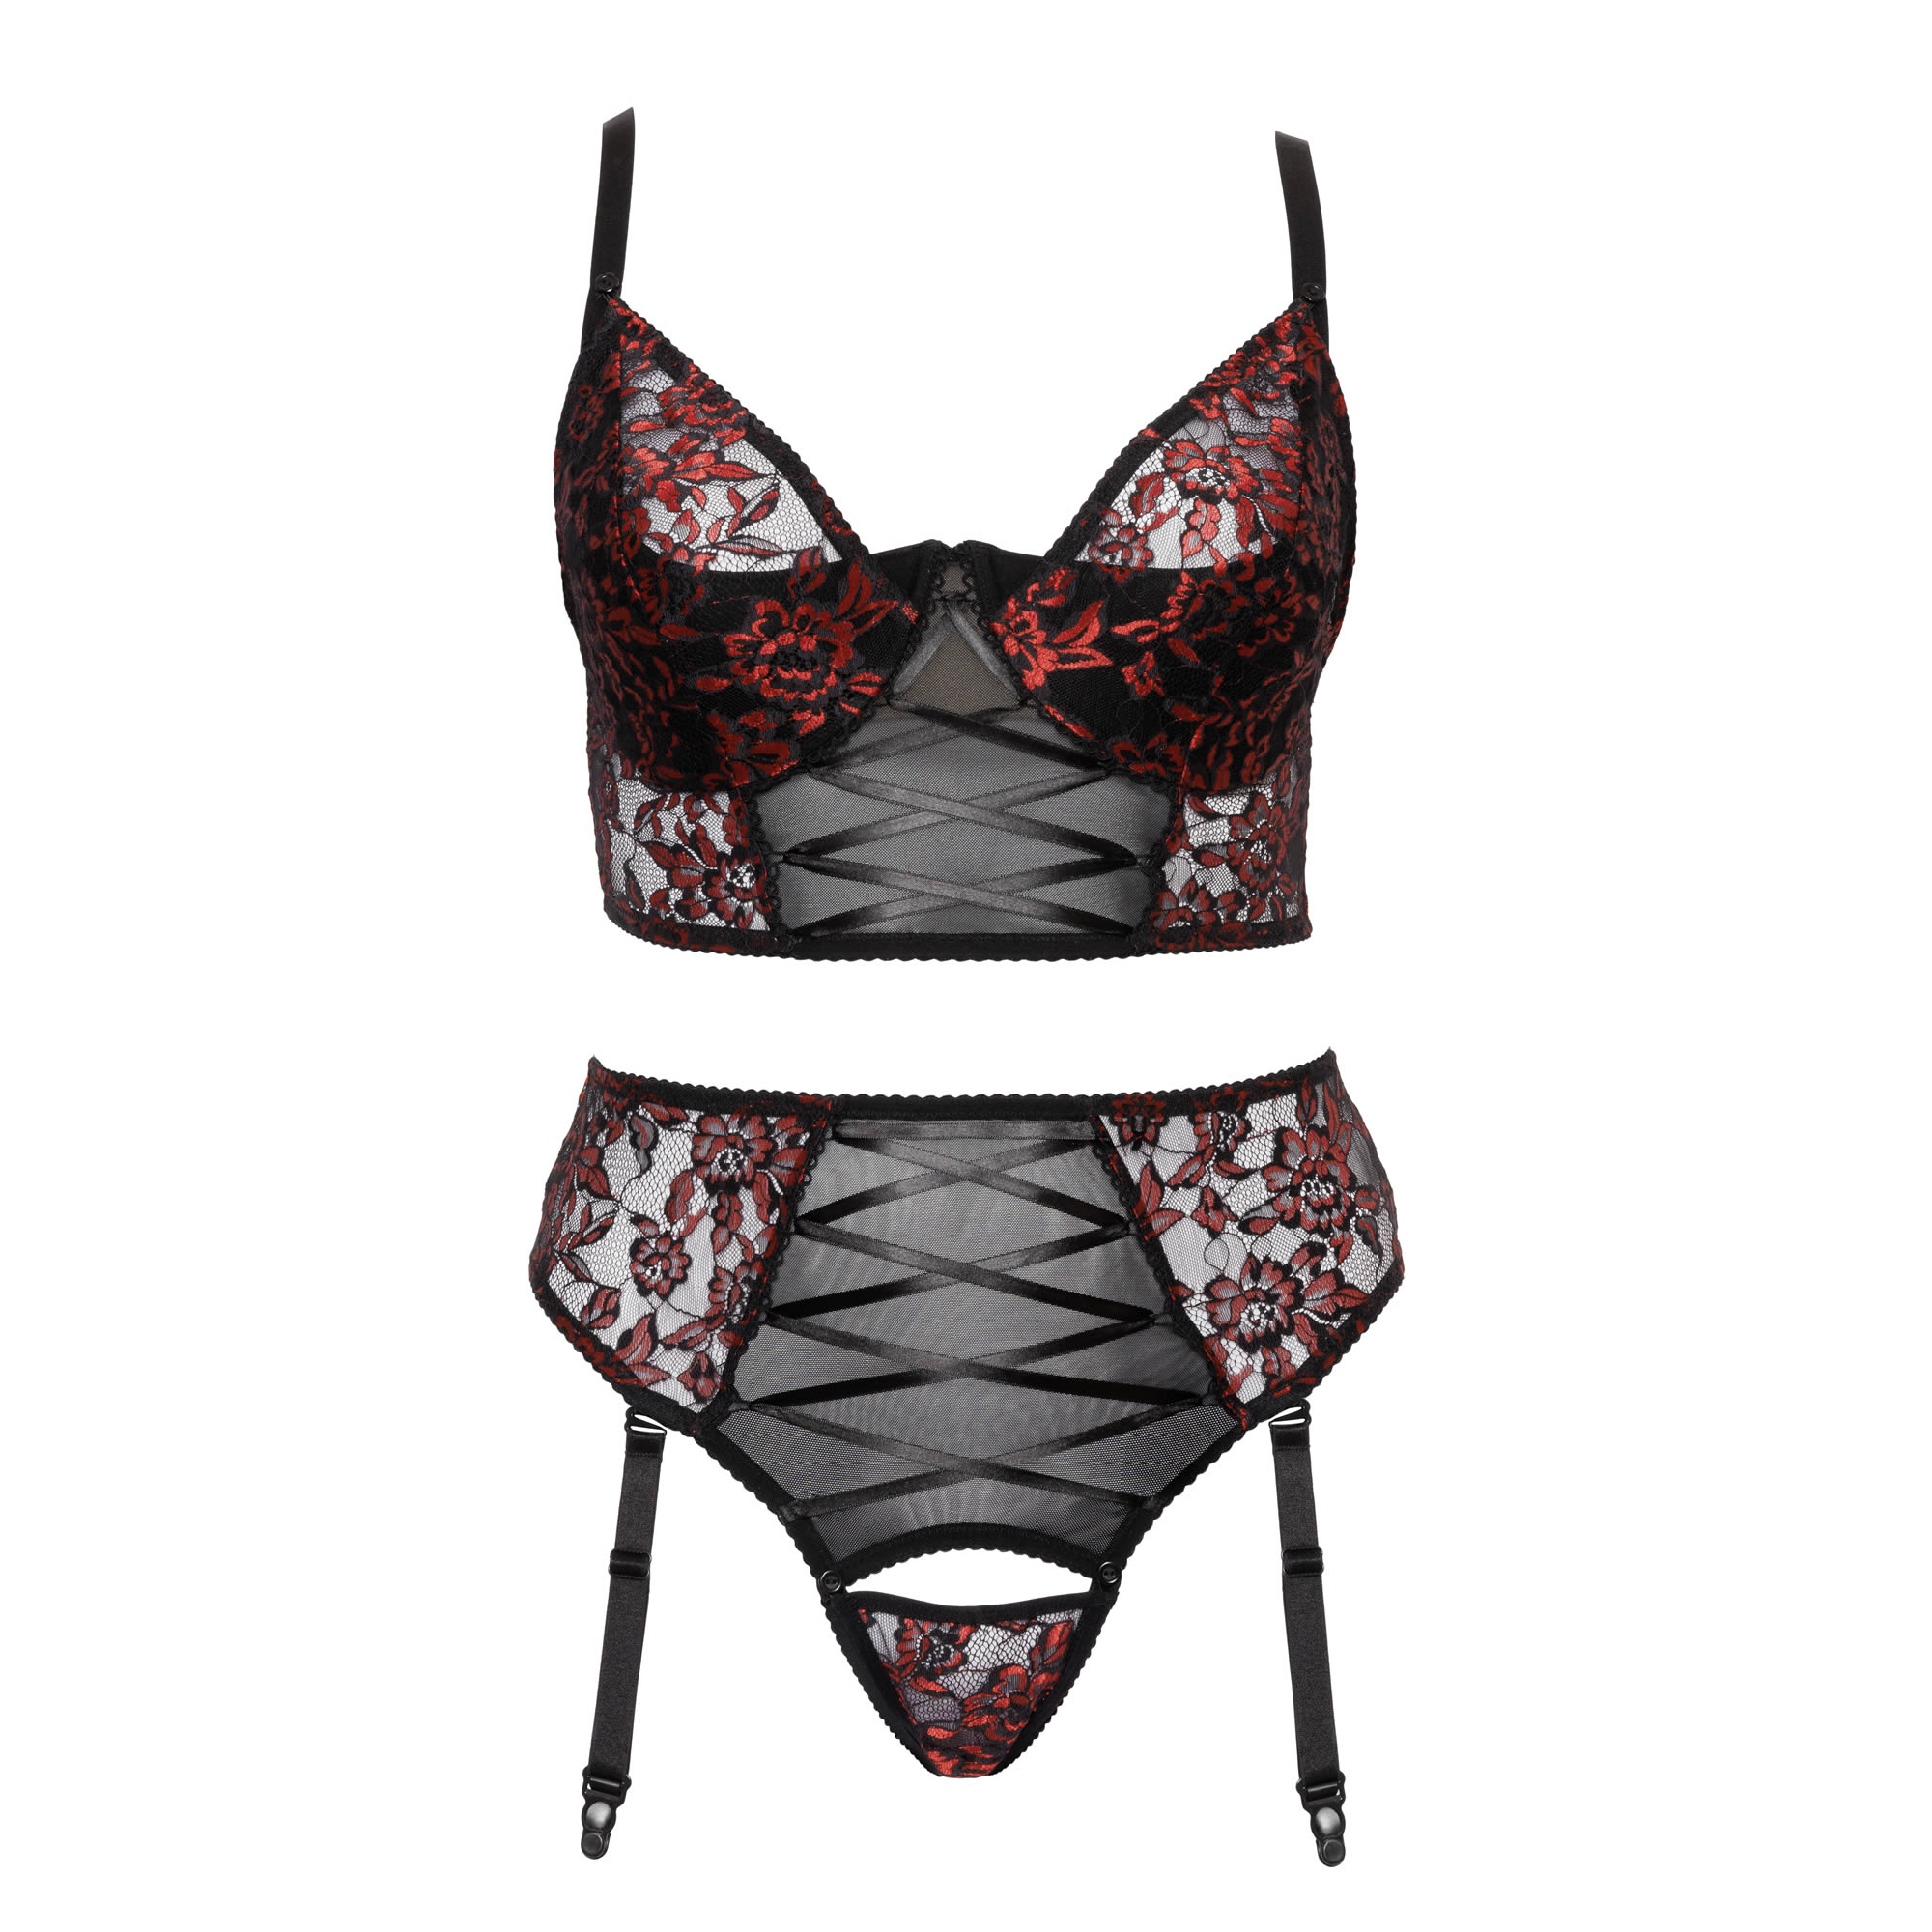 Plus Size Longline bra and suspender thong set in red and black